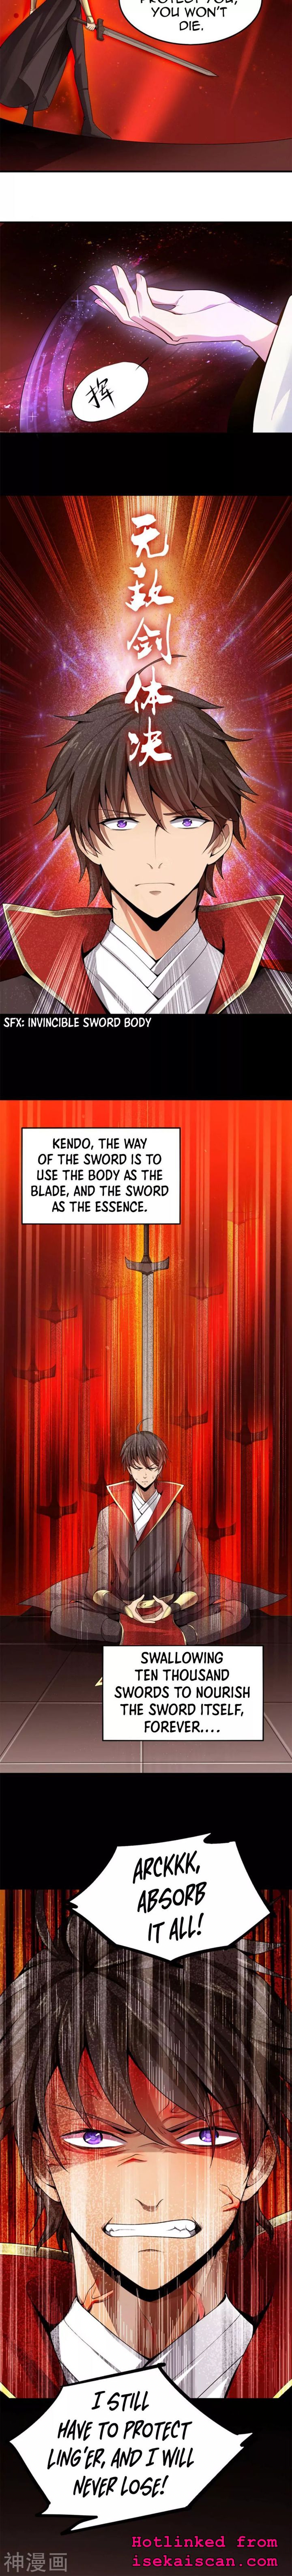 One Sword Reigns Supreme Chapter 2 Page 6